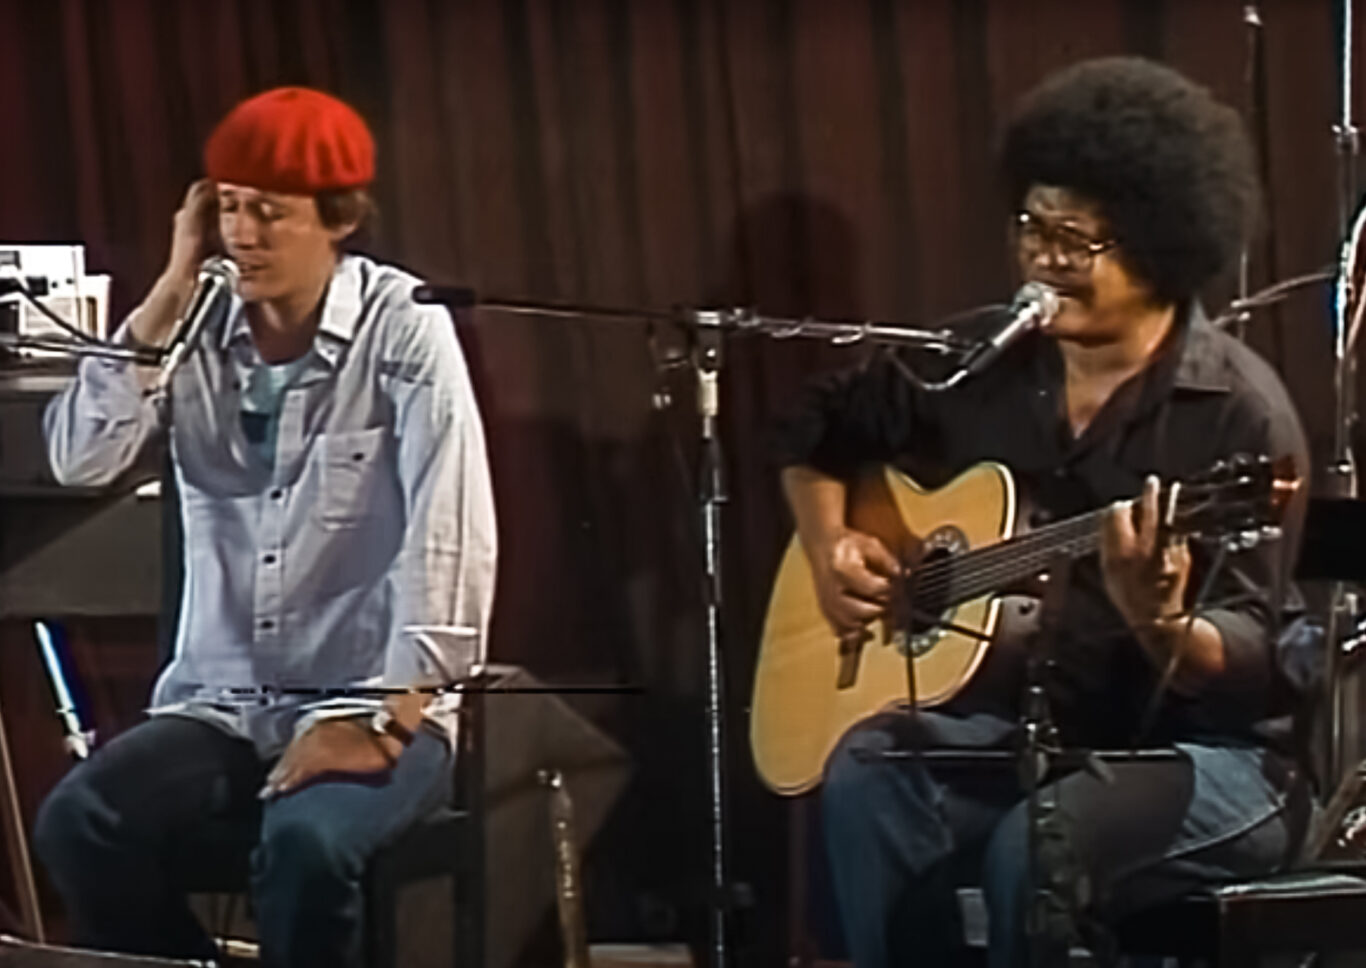 Silvio and Pablo as a duet on the stage of Obras Sanitarias. Screenshot of the concert.